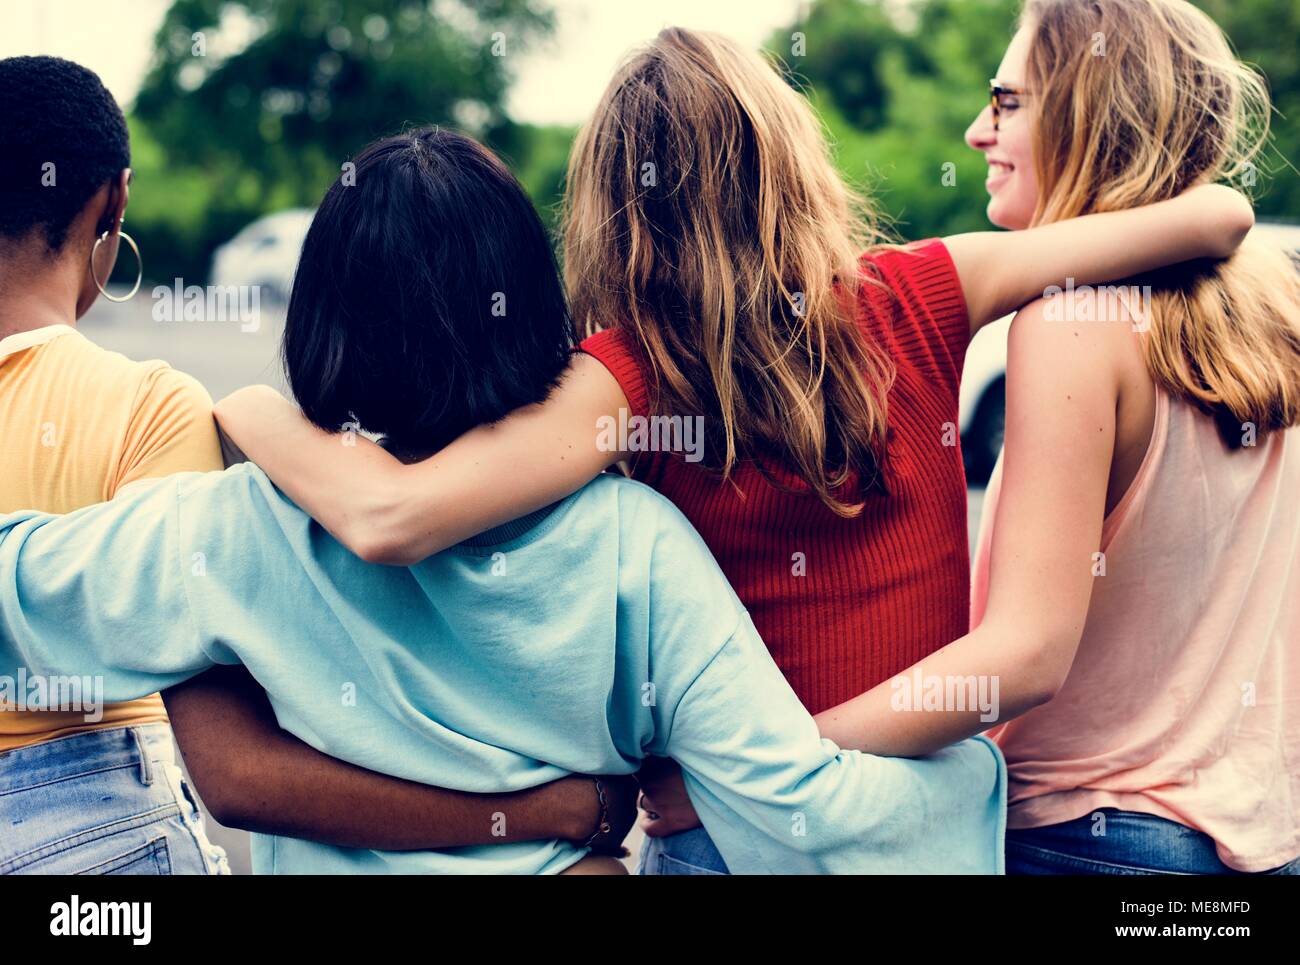 Rear view of a group of diverse woman friends walking together Stock Photo